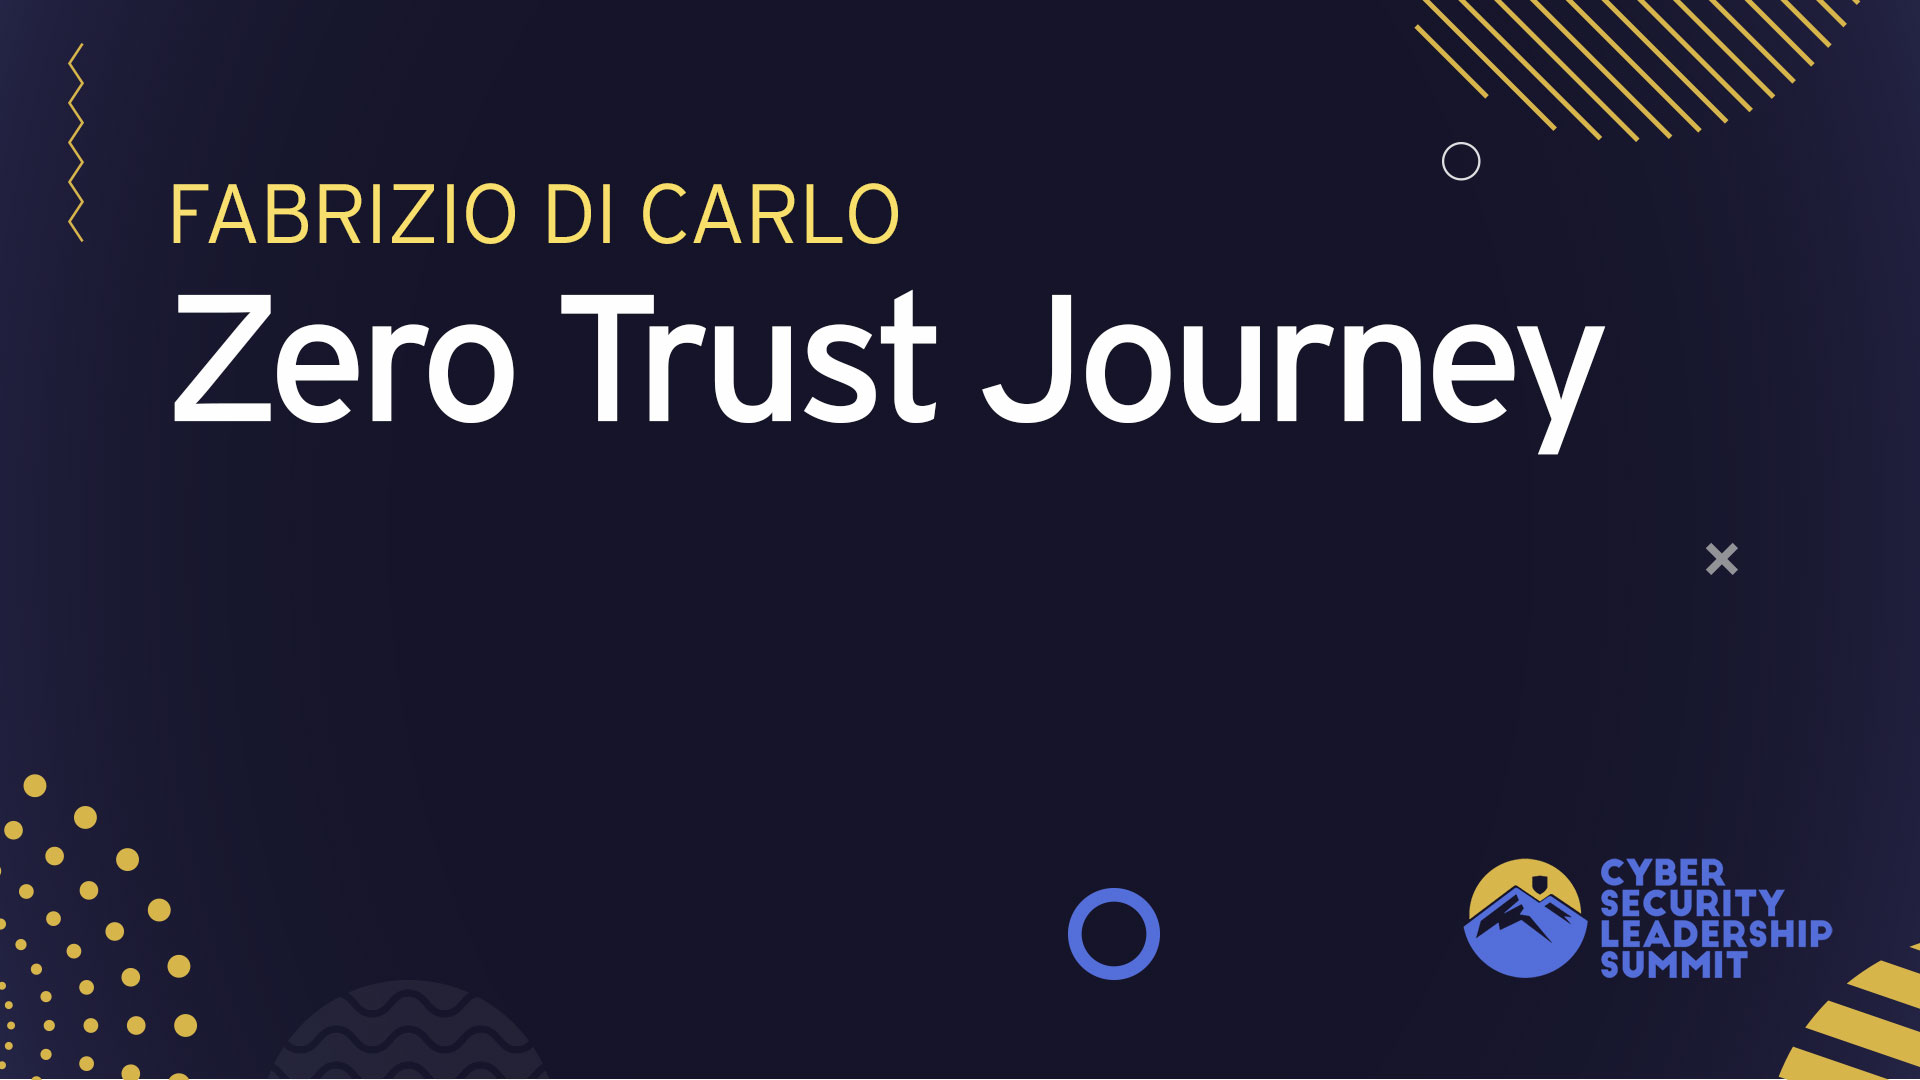 Zero Trust Journey, How We Moved from an Immature Organization to Zero Trust